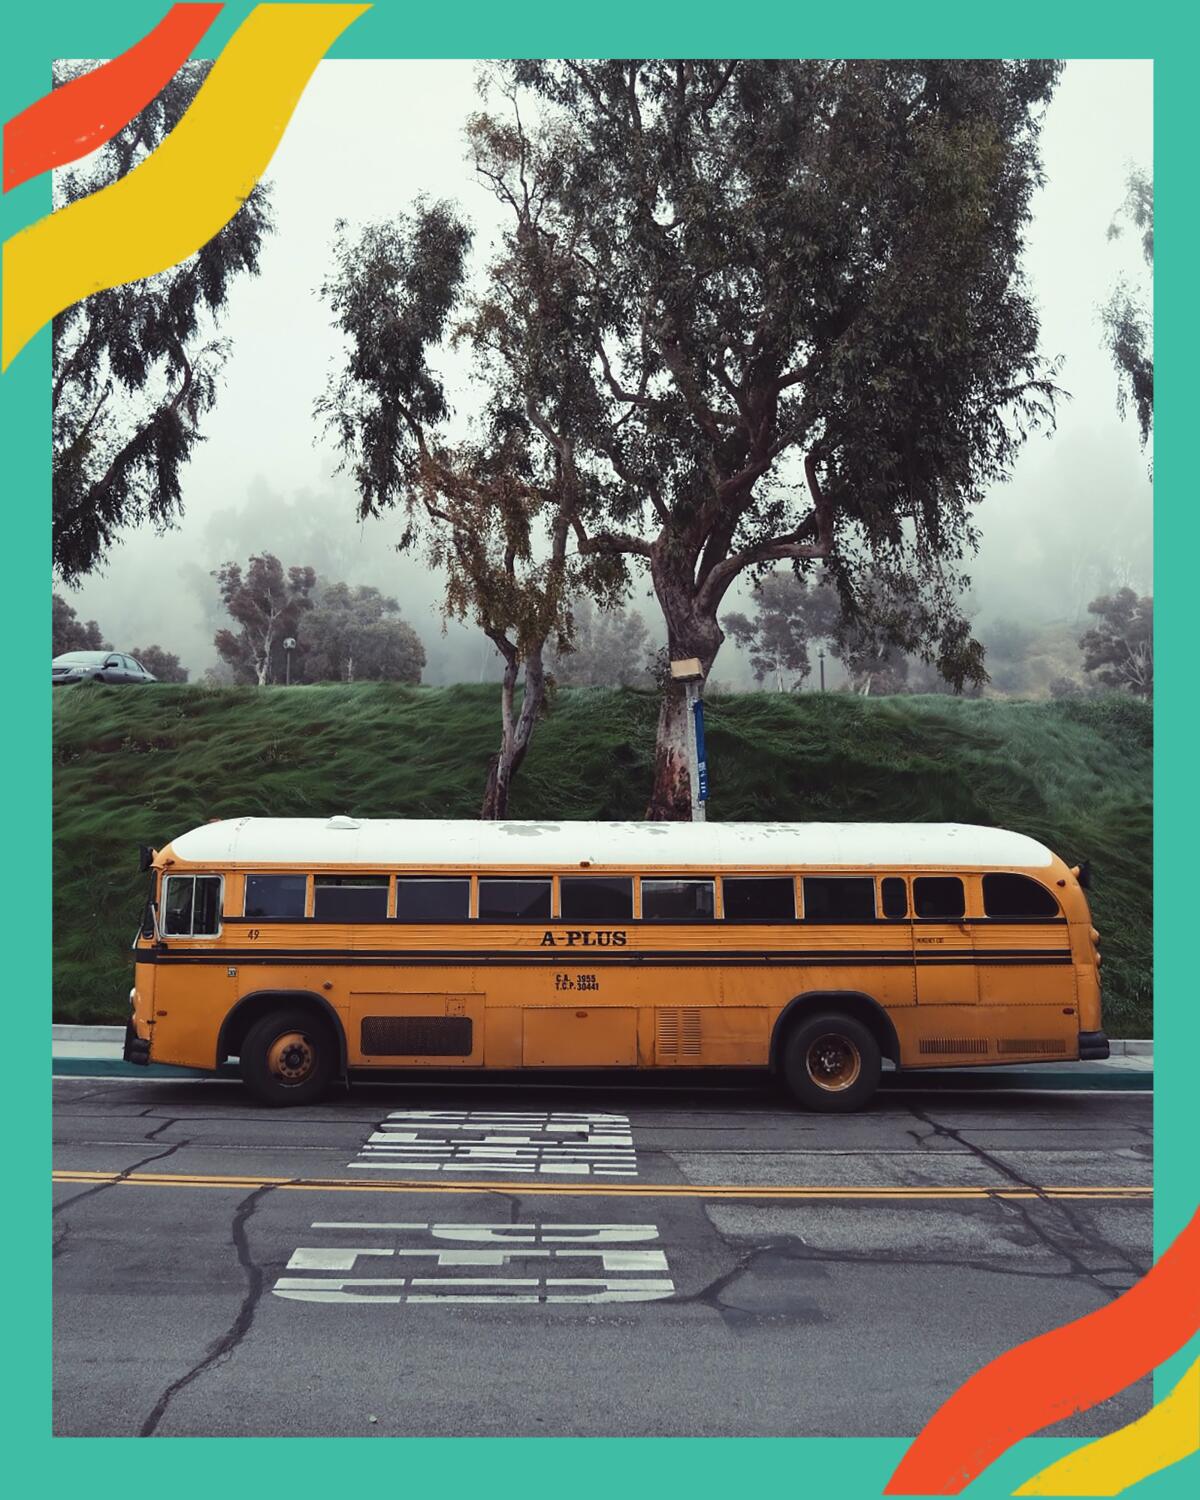 School buses aren't just for transportation — they can be vacation retreats.